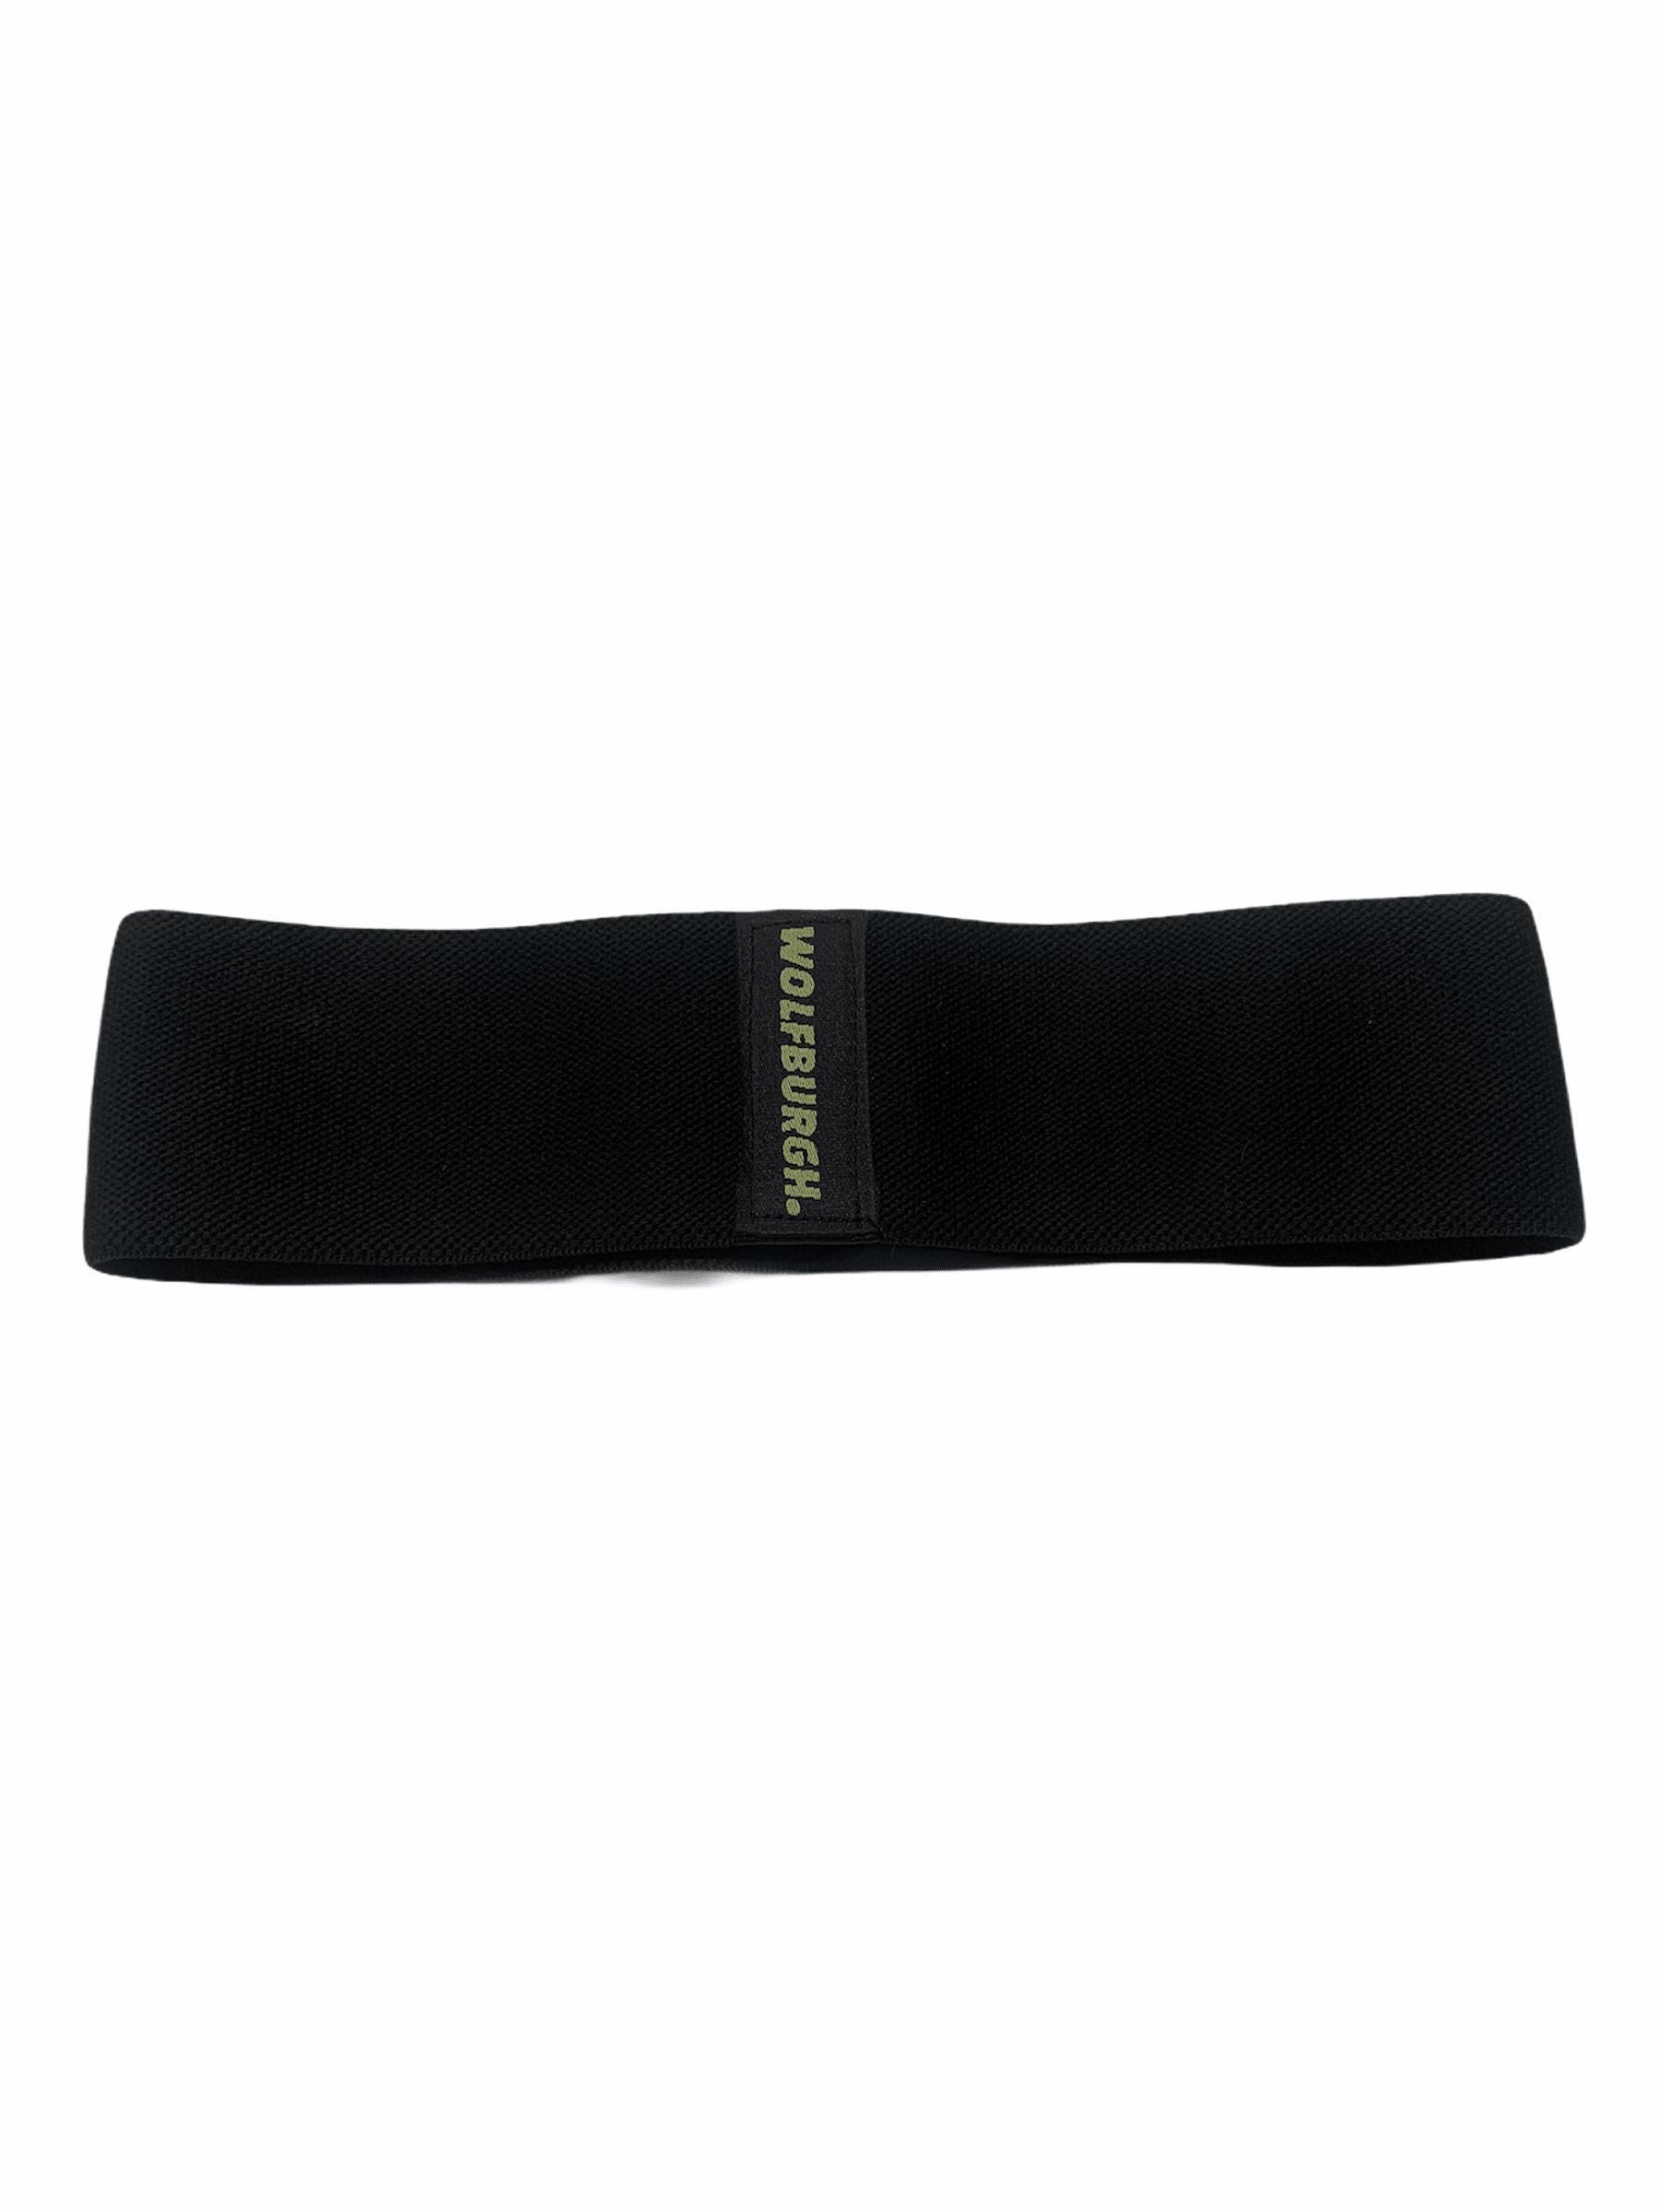 Firm Fabric Resistance Band Wolfburgh Wellness 